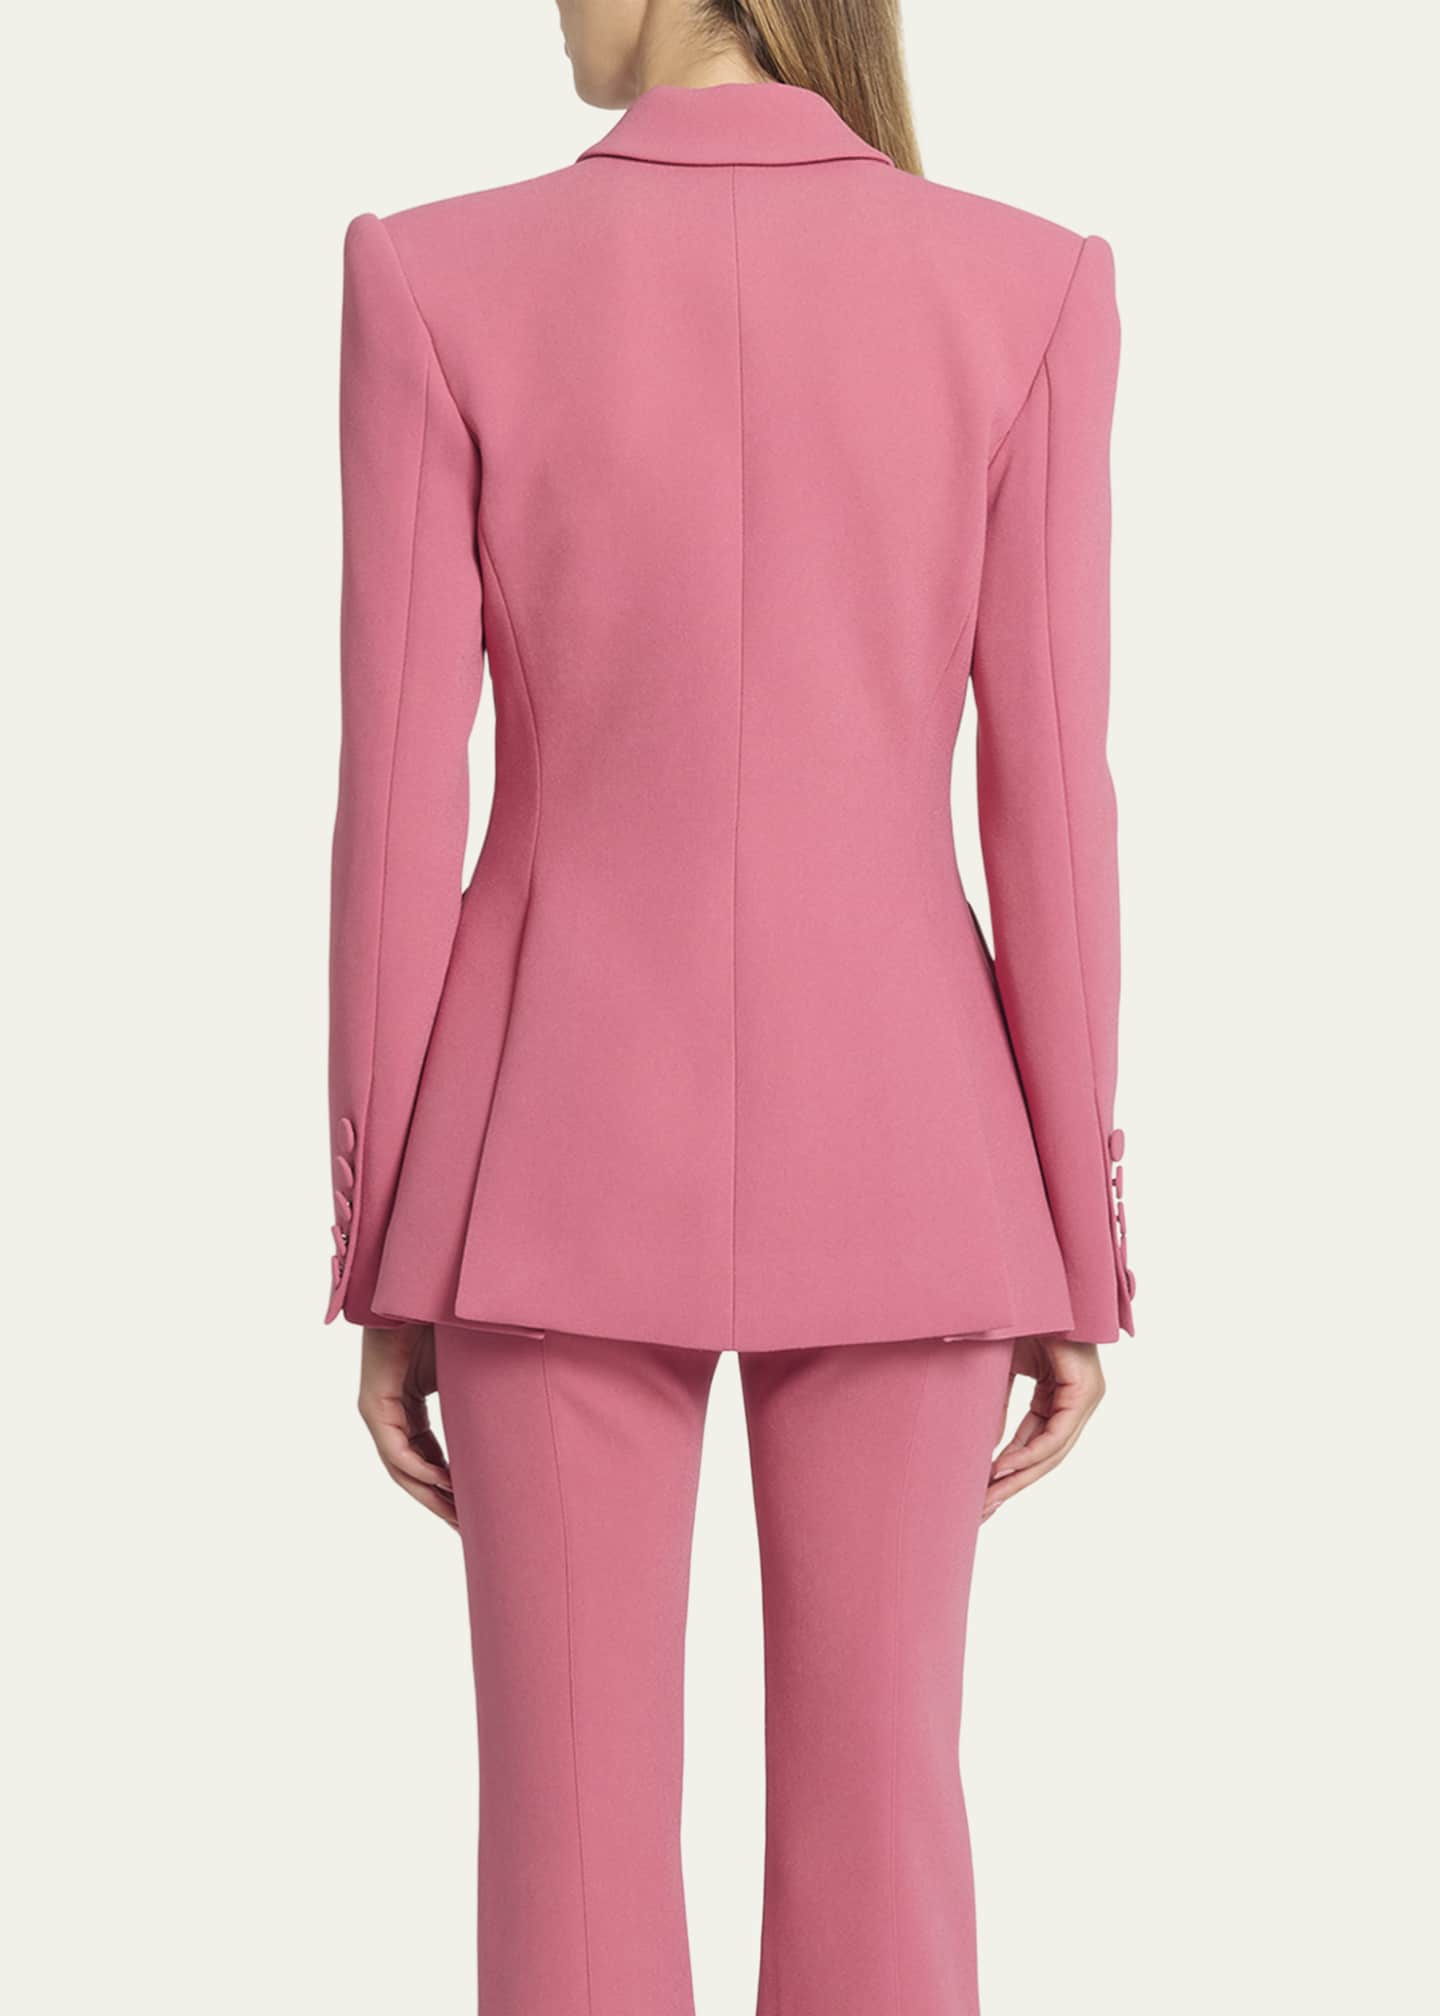 Alex Perry Double-Breasted Stretch Crepe Fitted Blazer - Bergdorf Goodman